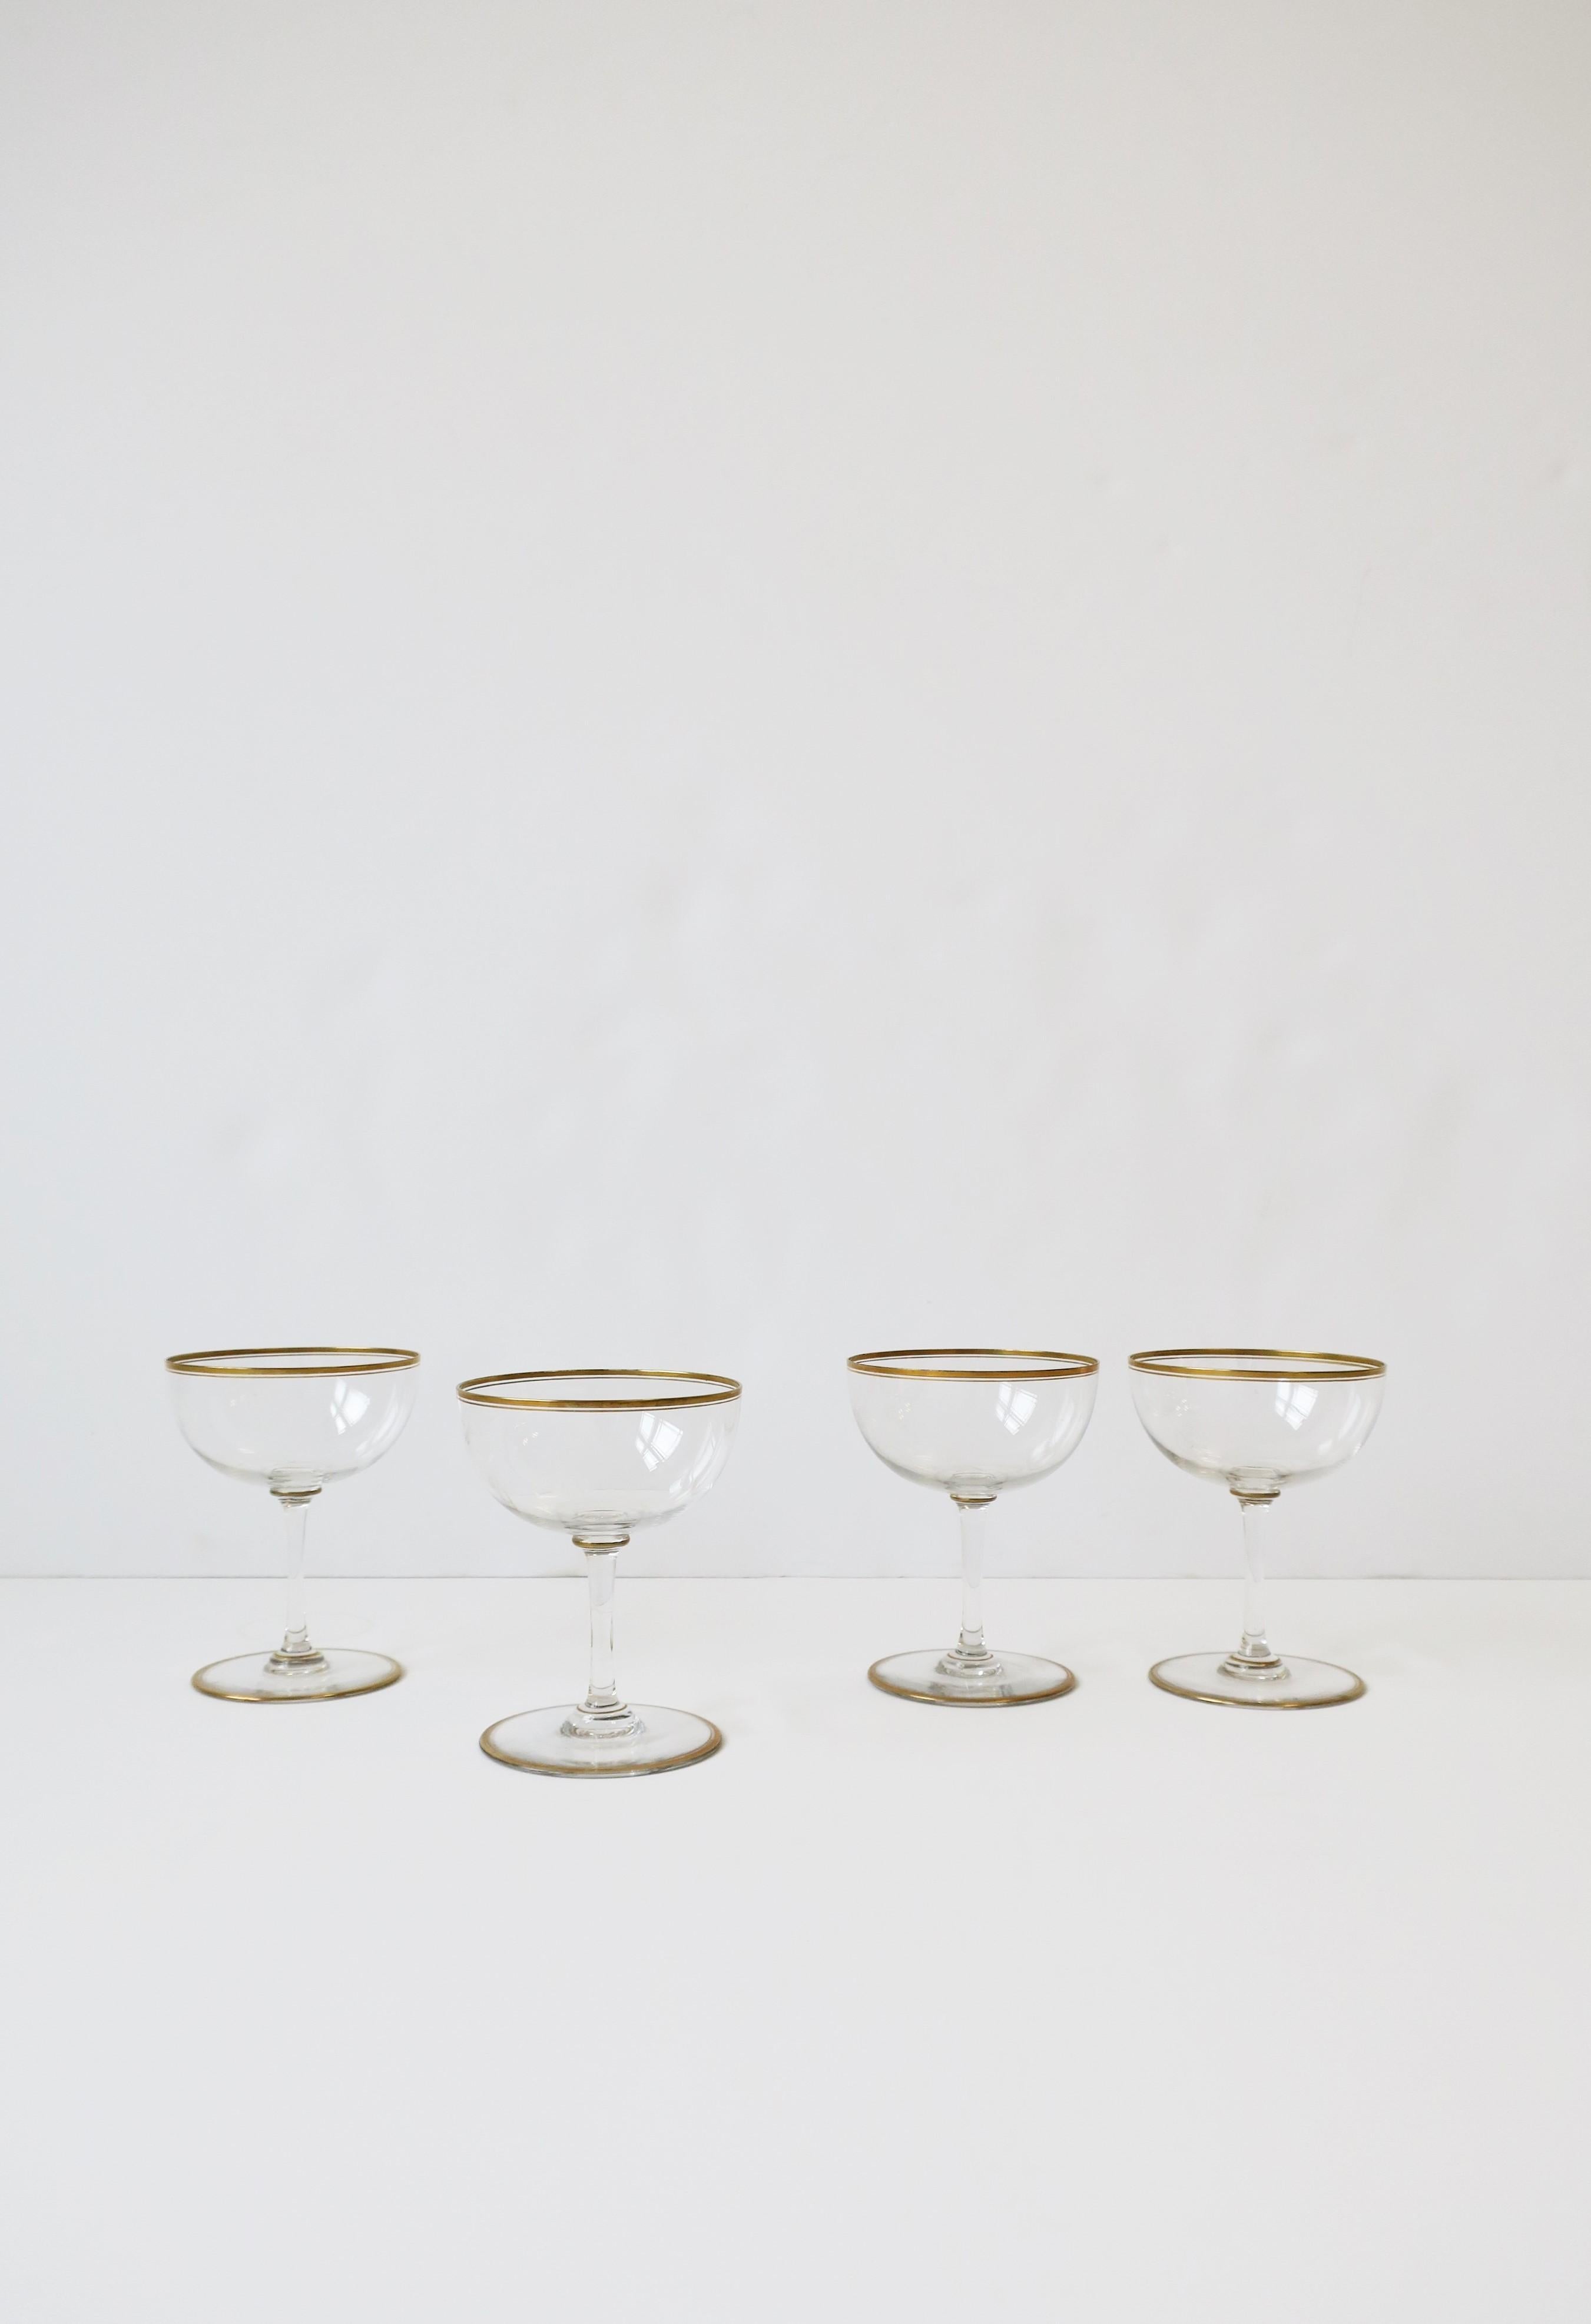 A beautiful set of four (4) Mid-Century Modern cocktail or champagne coupes/glasses with gold detail, circa mid-20th century, Europe. A beautiful set for entertaining, bar, bar cart, etc., or to enjoy everyday. Dimensions: 3.38